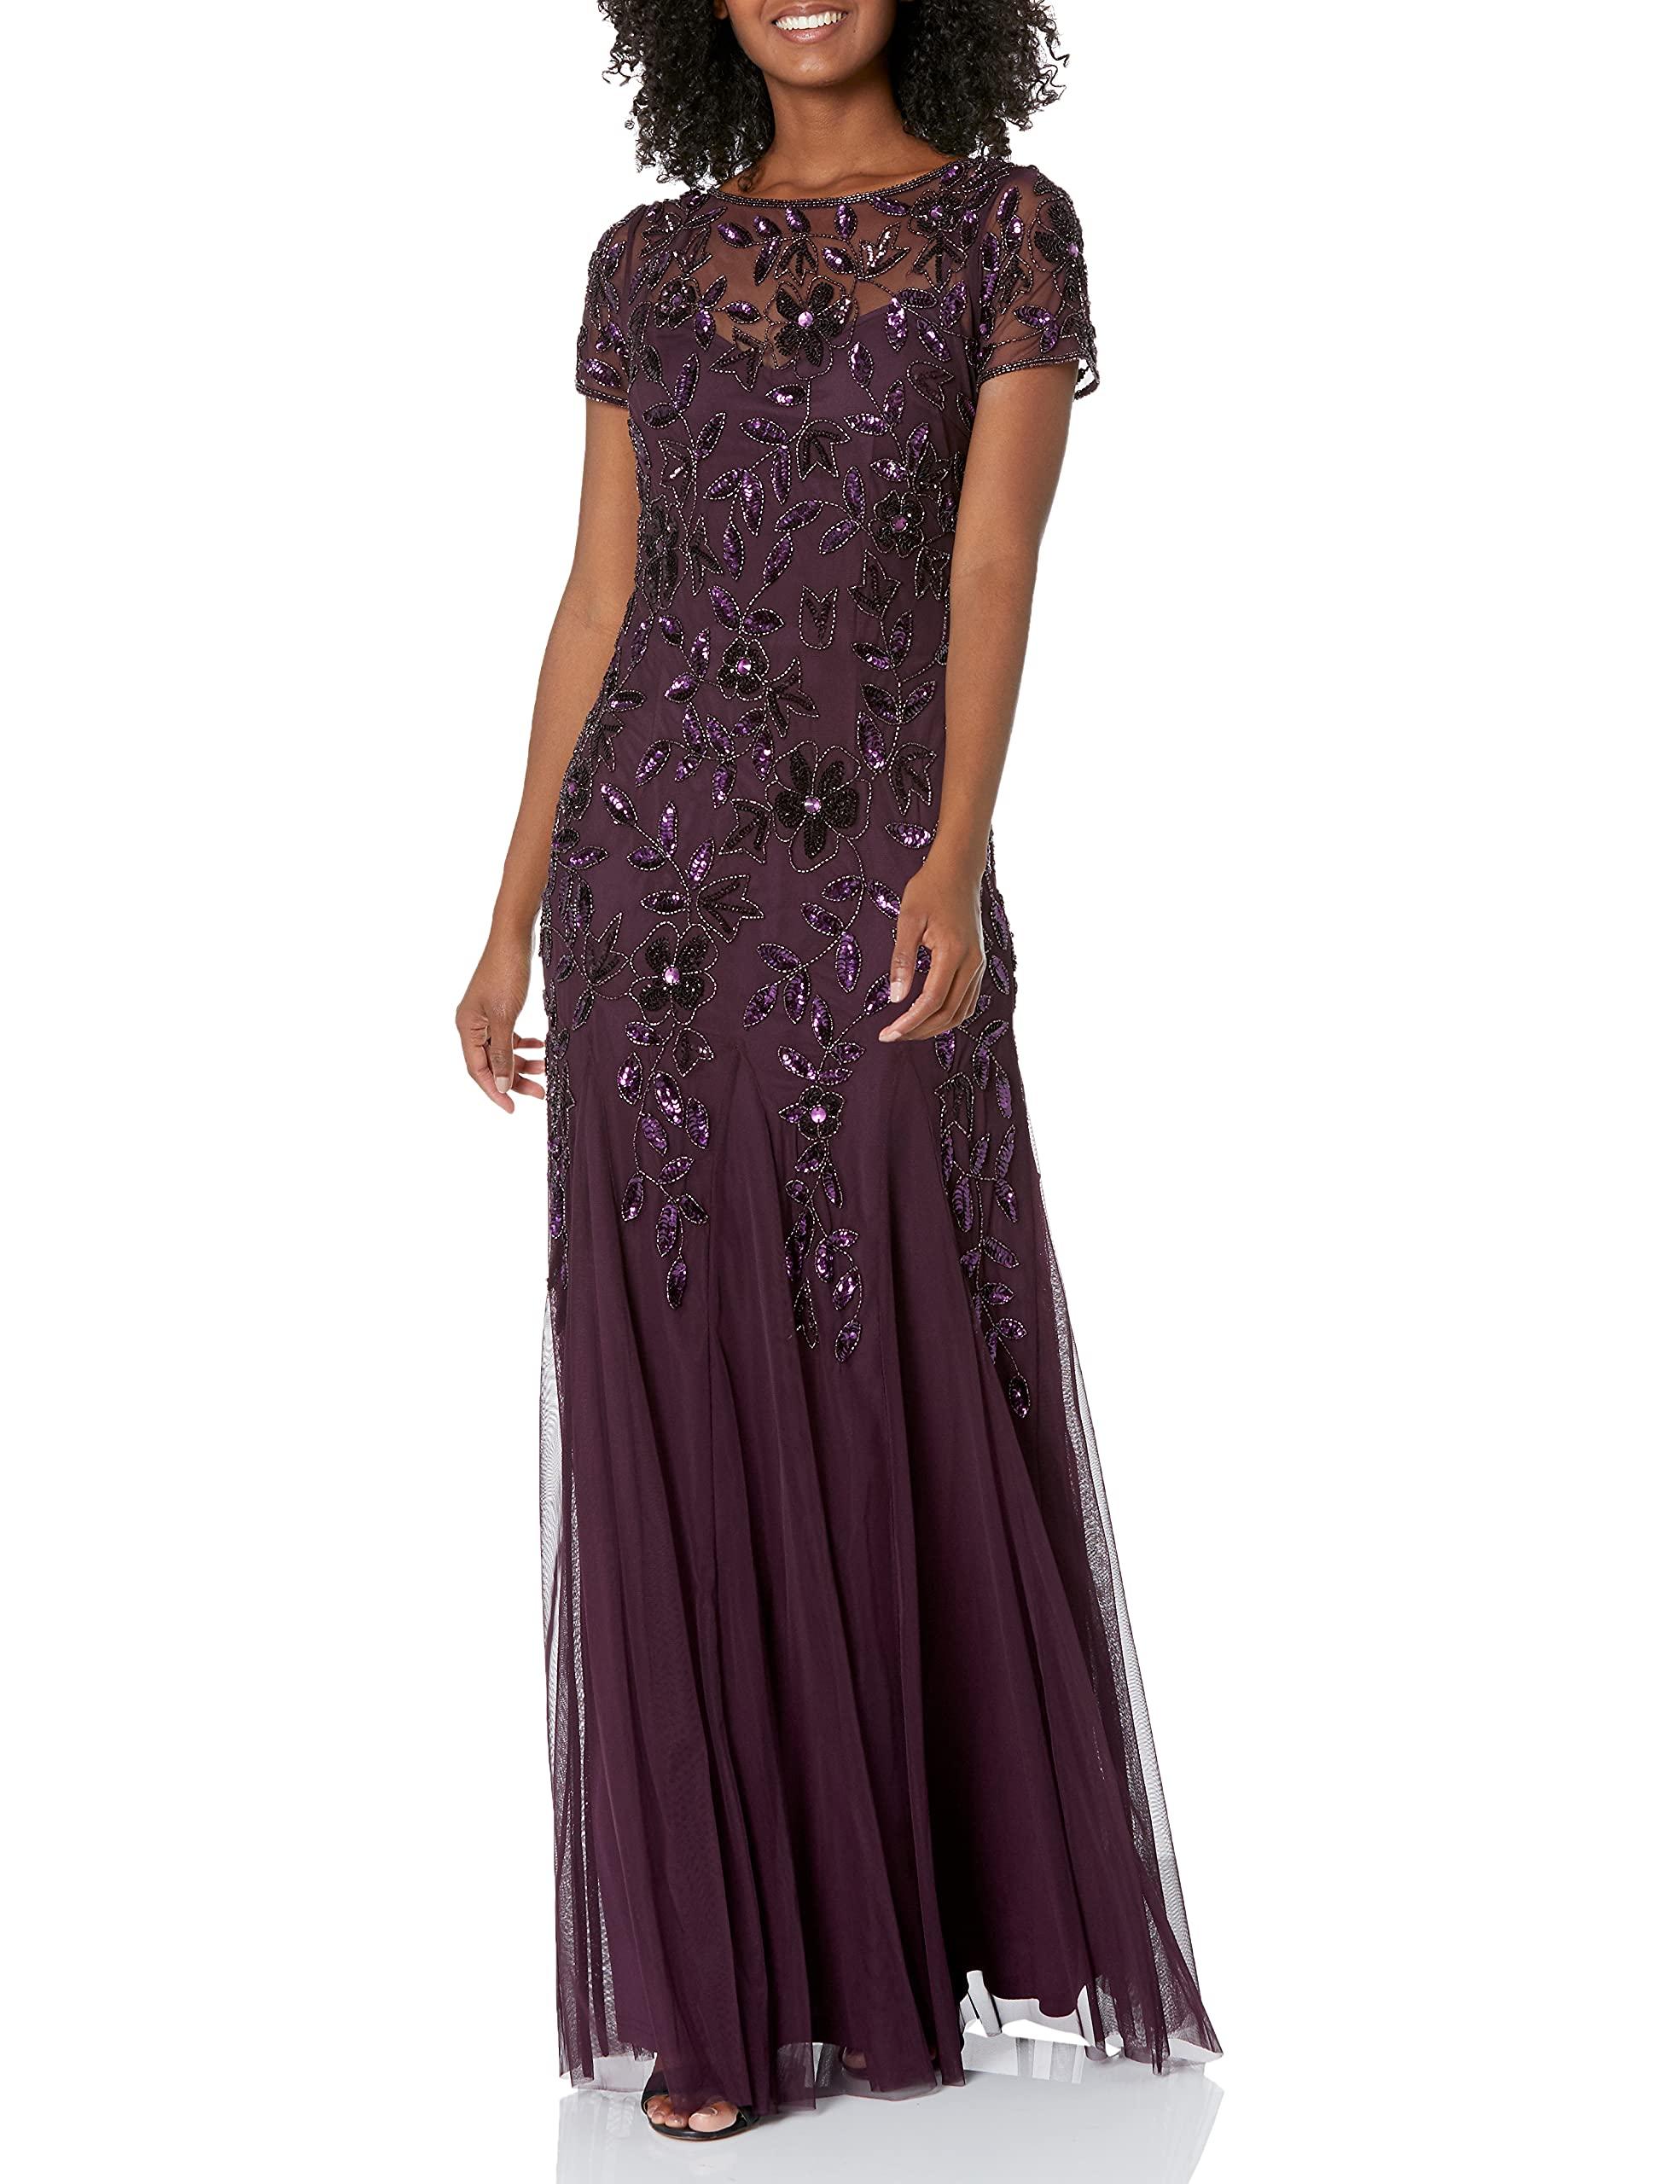 Adrianna Papell Floral Beaded Godet Gown Dress in Purple | Lyst